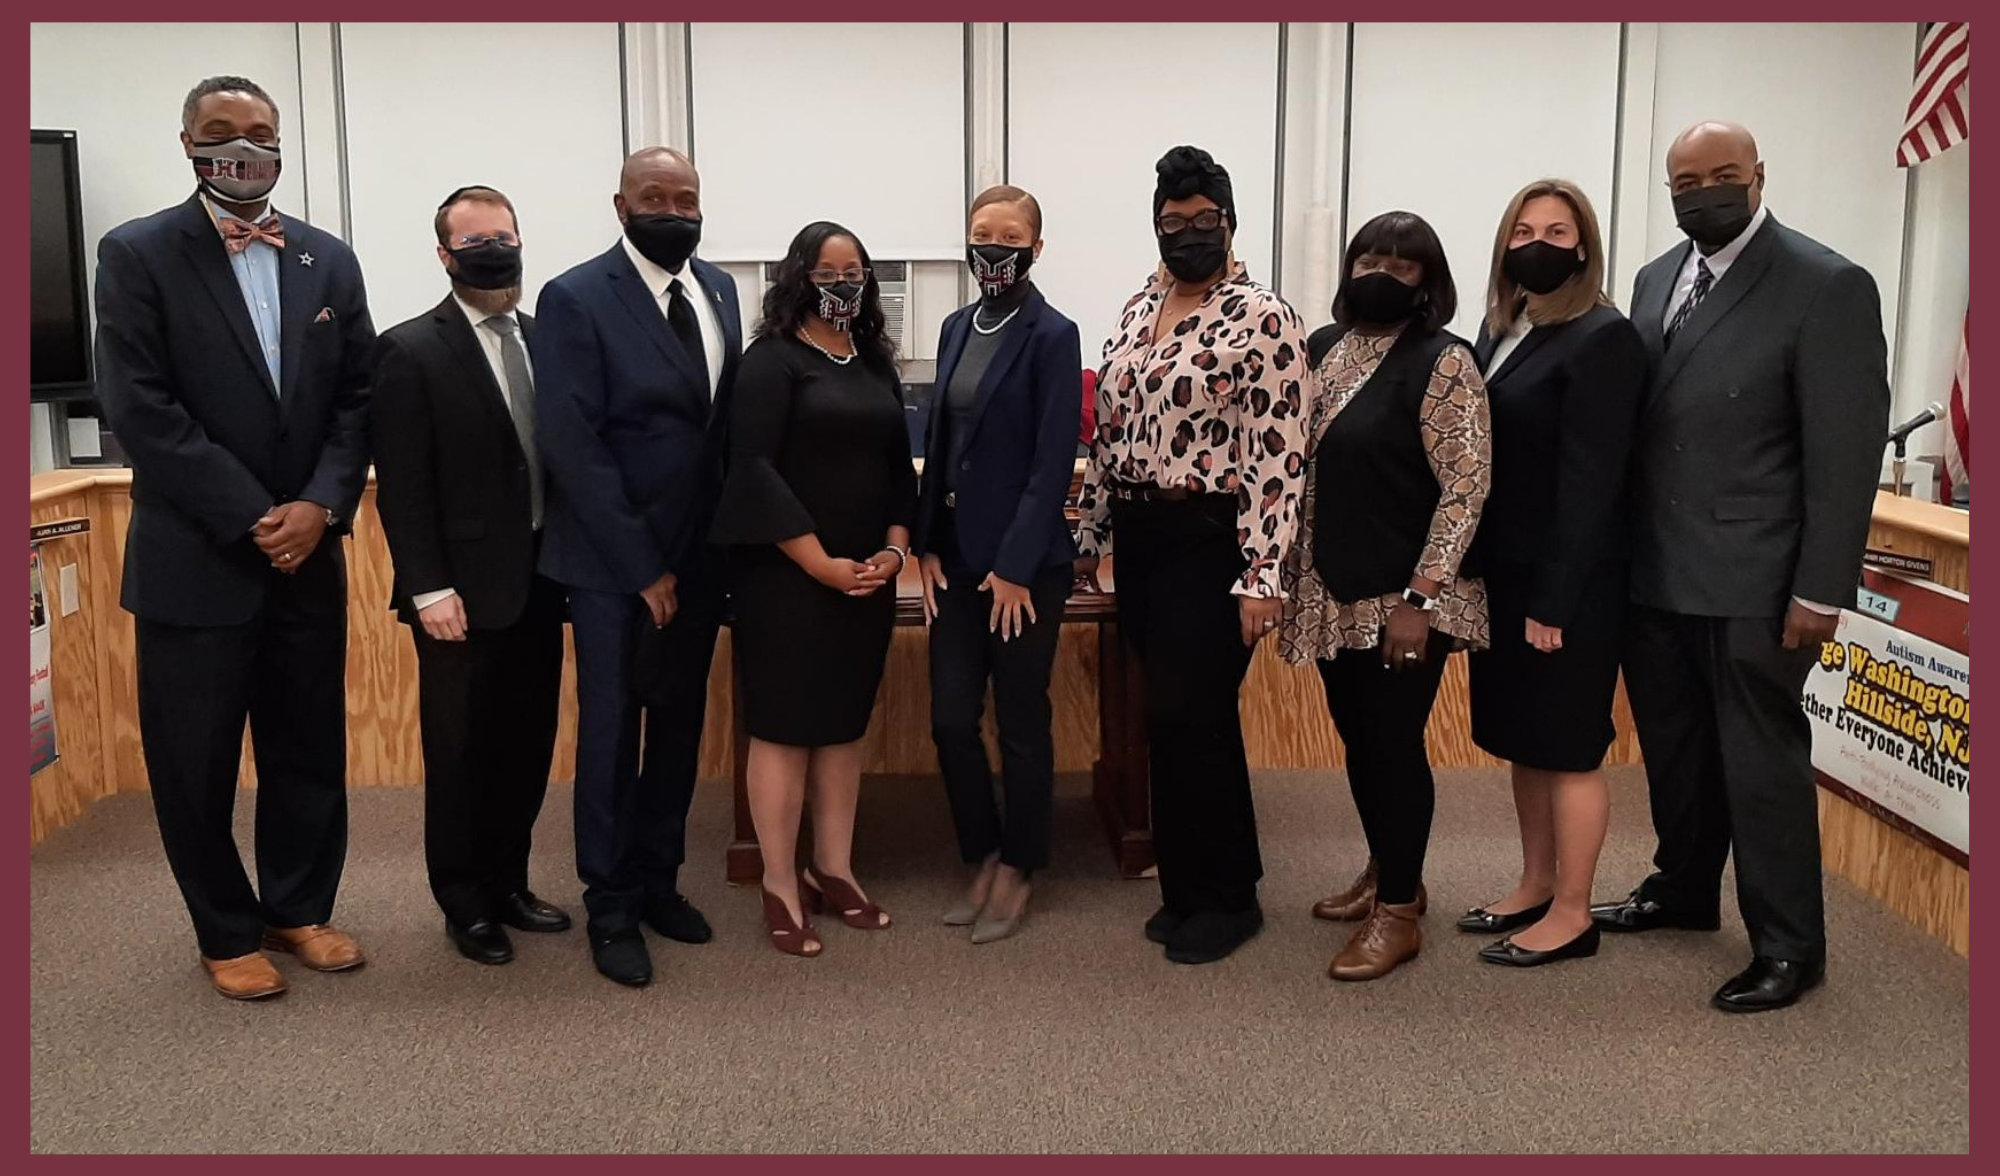 Board members standing together while wearing face masks. 